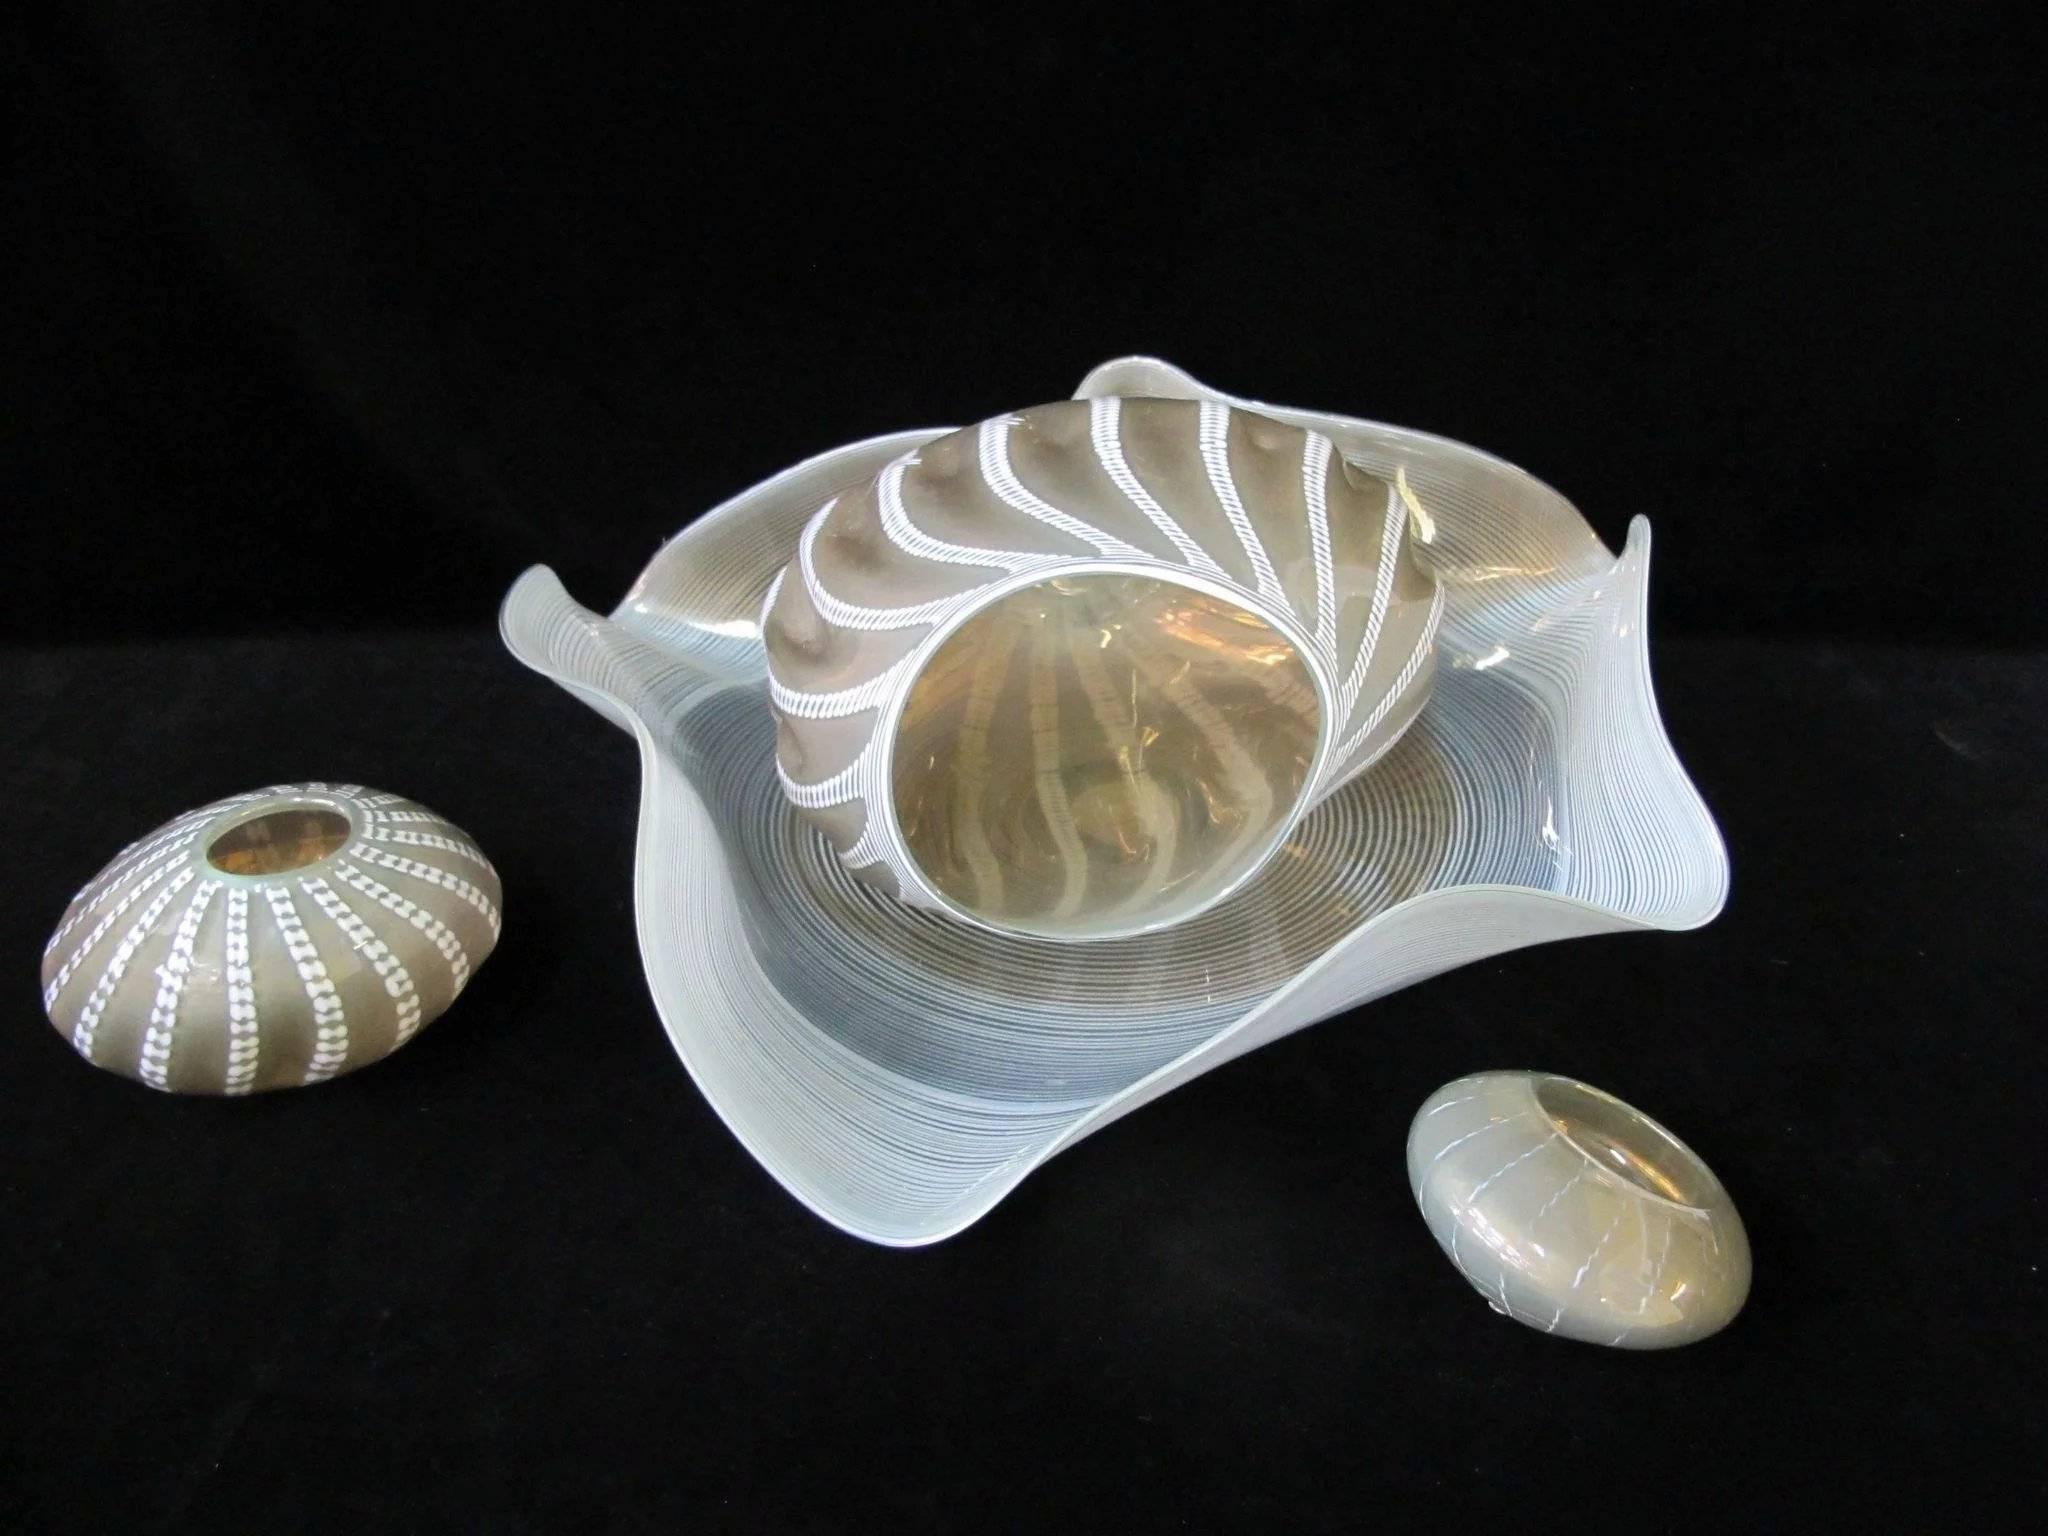 An authentic Dale Chihuly four-piece glass set Seaform sculpture in celadon and gray. It's signed at the base, no chips, cracks or repairs, and minimal surface scratching, mostly at the base.
Largest piece measures 27